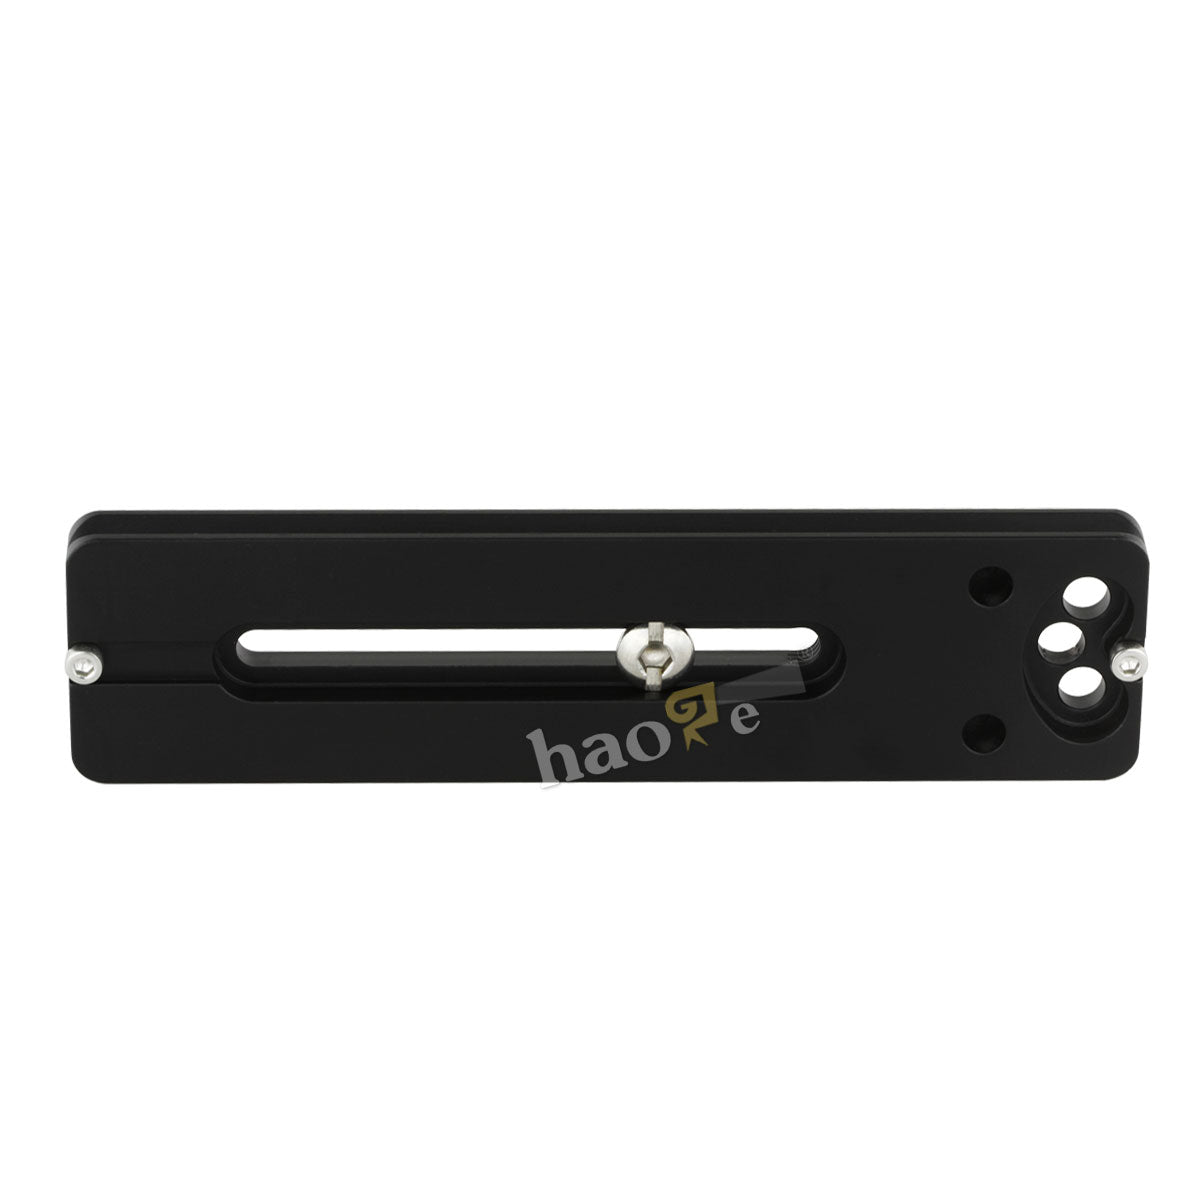 Haoge 150mm LQR-150 Lens Plate Quick Release for Canon Nikon Sigma Pentax Sony Leica Tele Lenses Compatible with Arca Swiss